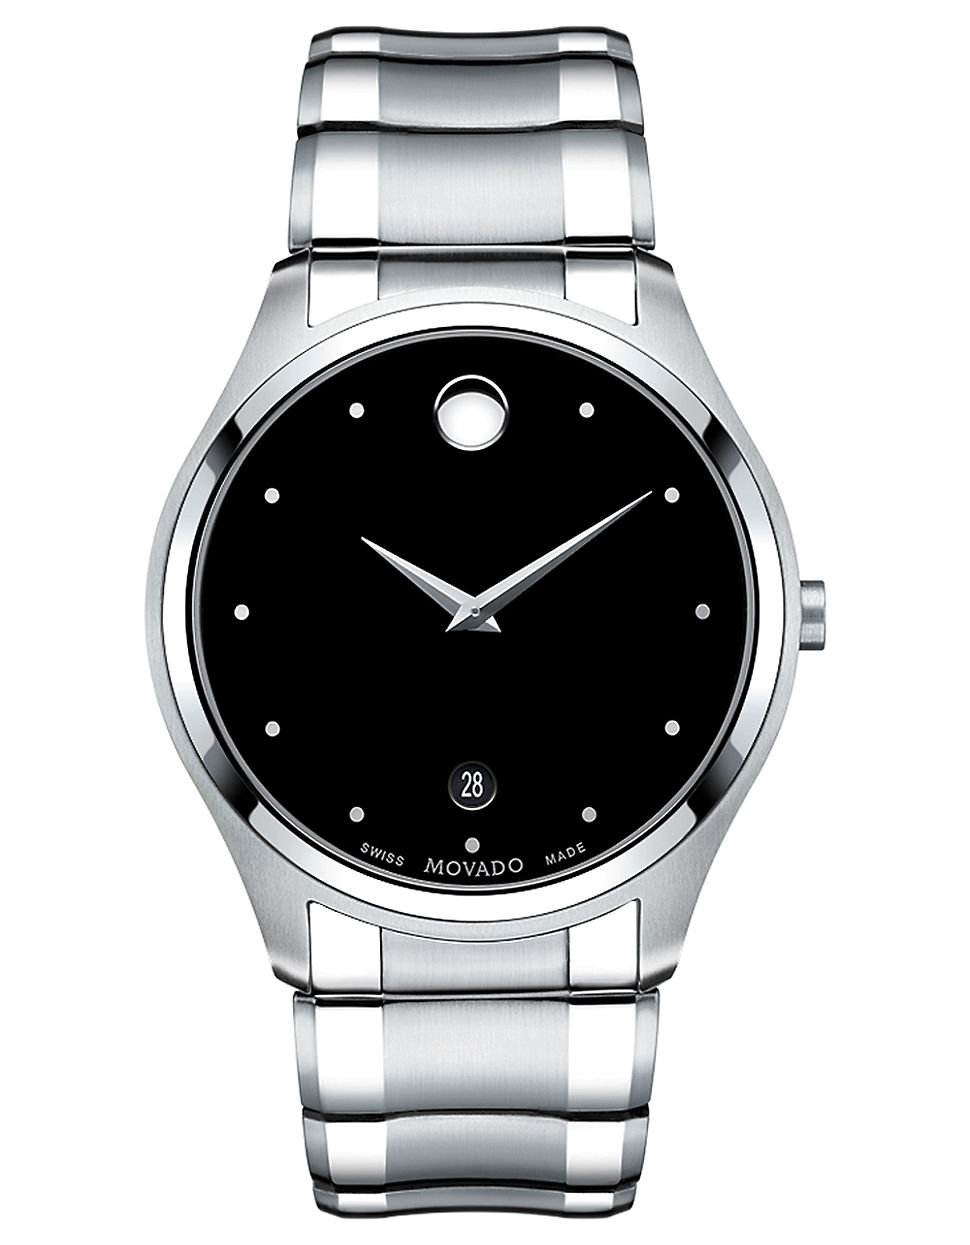 Stainless Steel Movado Watches Mens